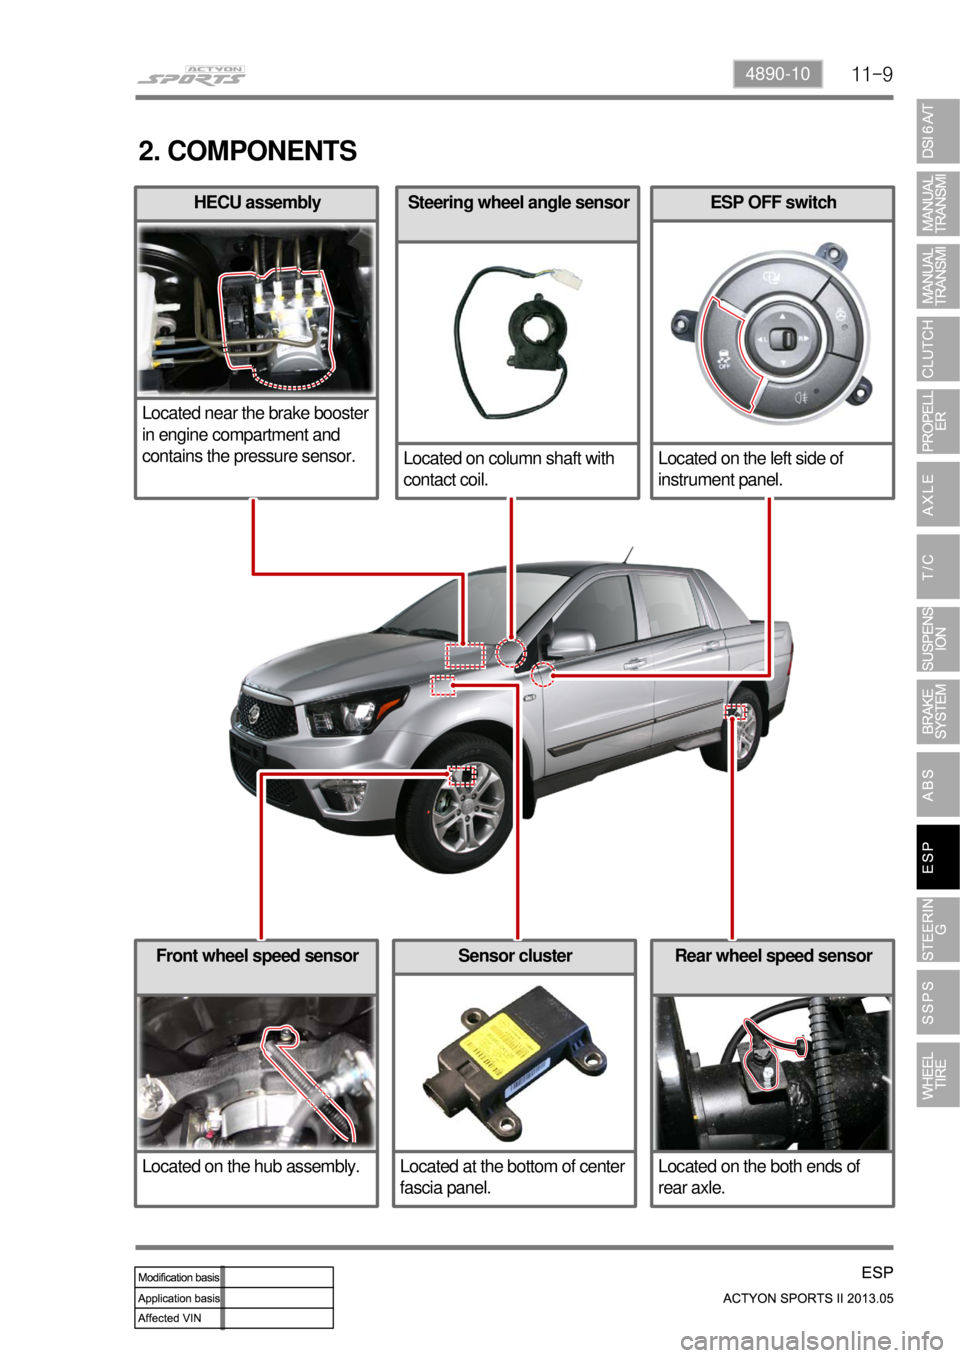 SSANGYONG NEW ACTYON SPORTS 2013  Service Manual 11-94890-10
ESP OFF switch
Located on the left side of 
instrument panel.
Rear wheel speed sensor
Located on the both ends of 
rear axle.Front wheel speed sensor
Located on the hub assembly.Sensor clu